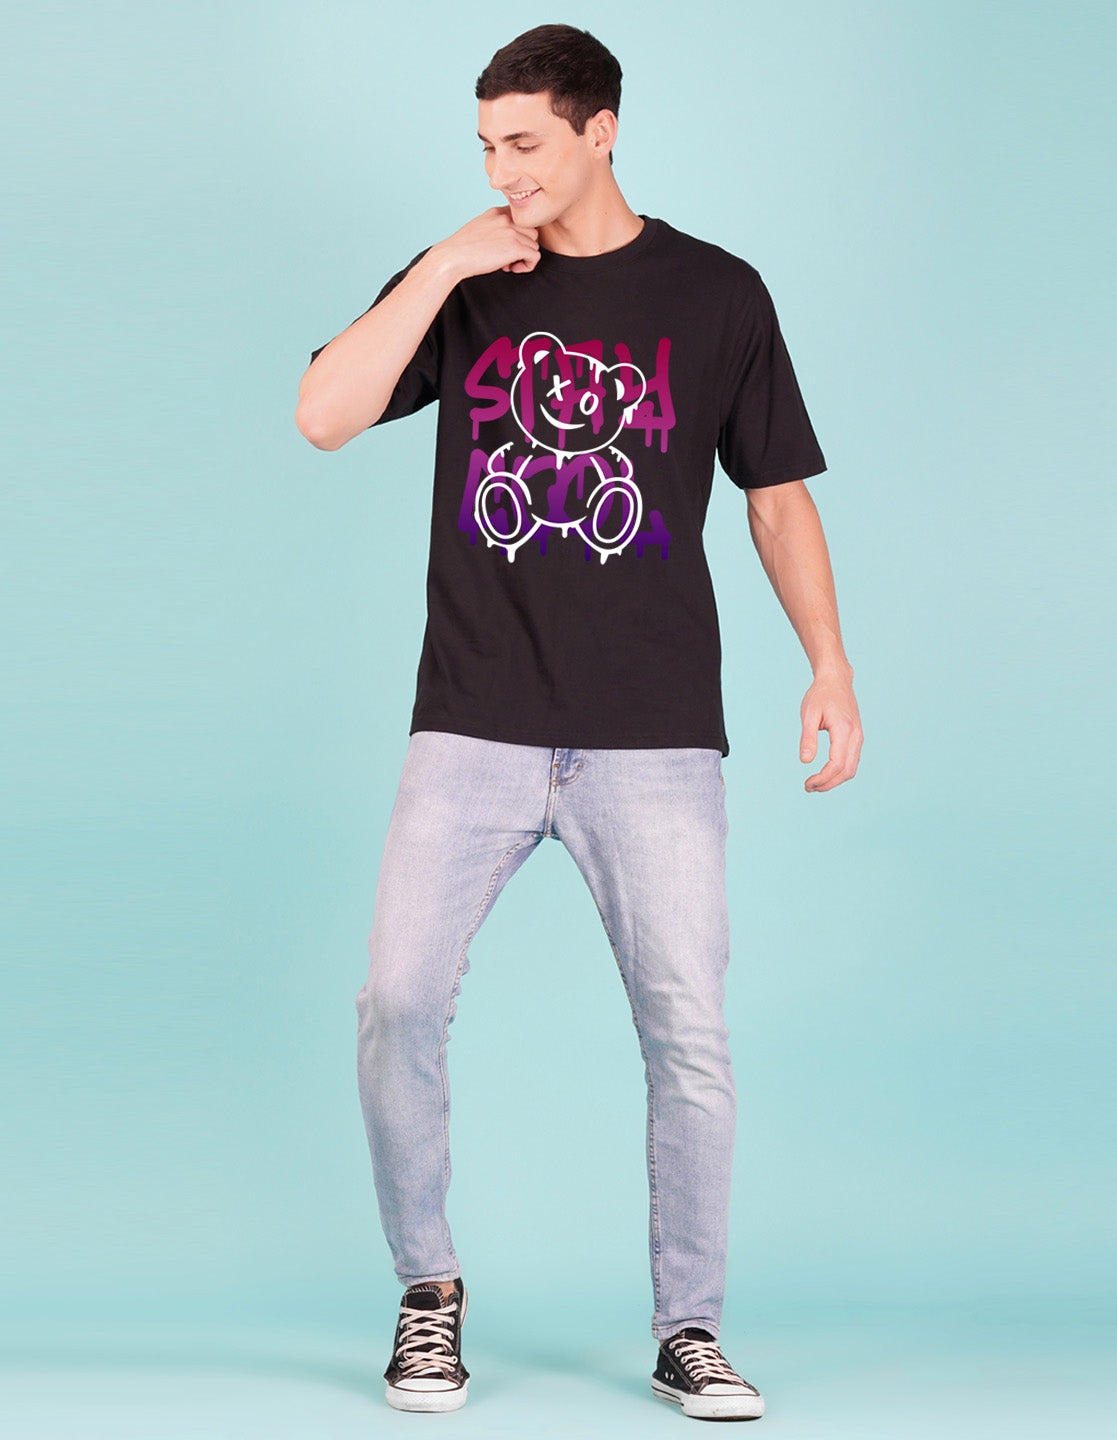 Nusyl Black Stay cool Printed oversized t-shirt